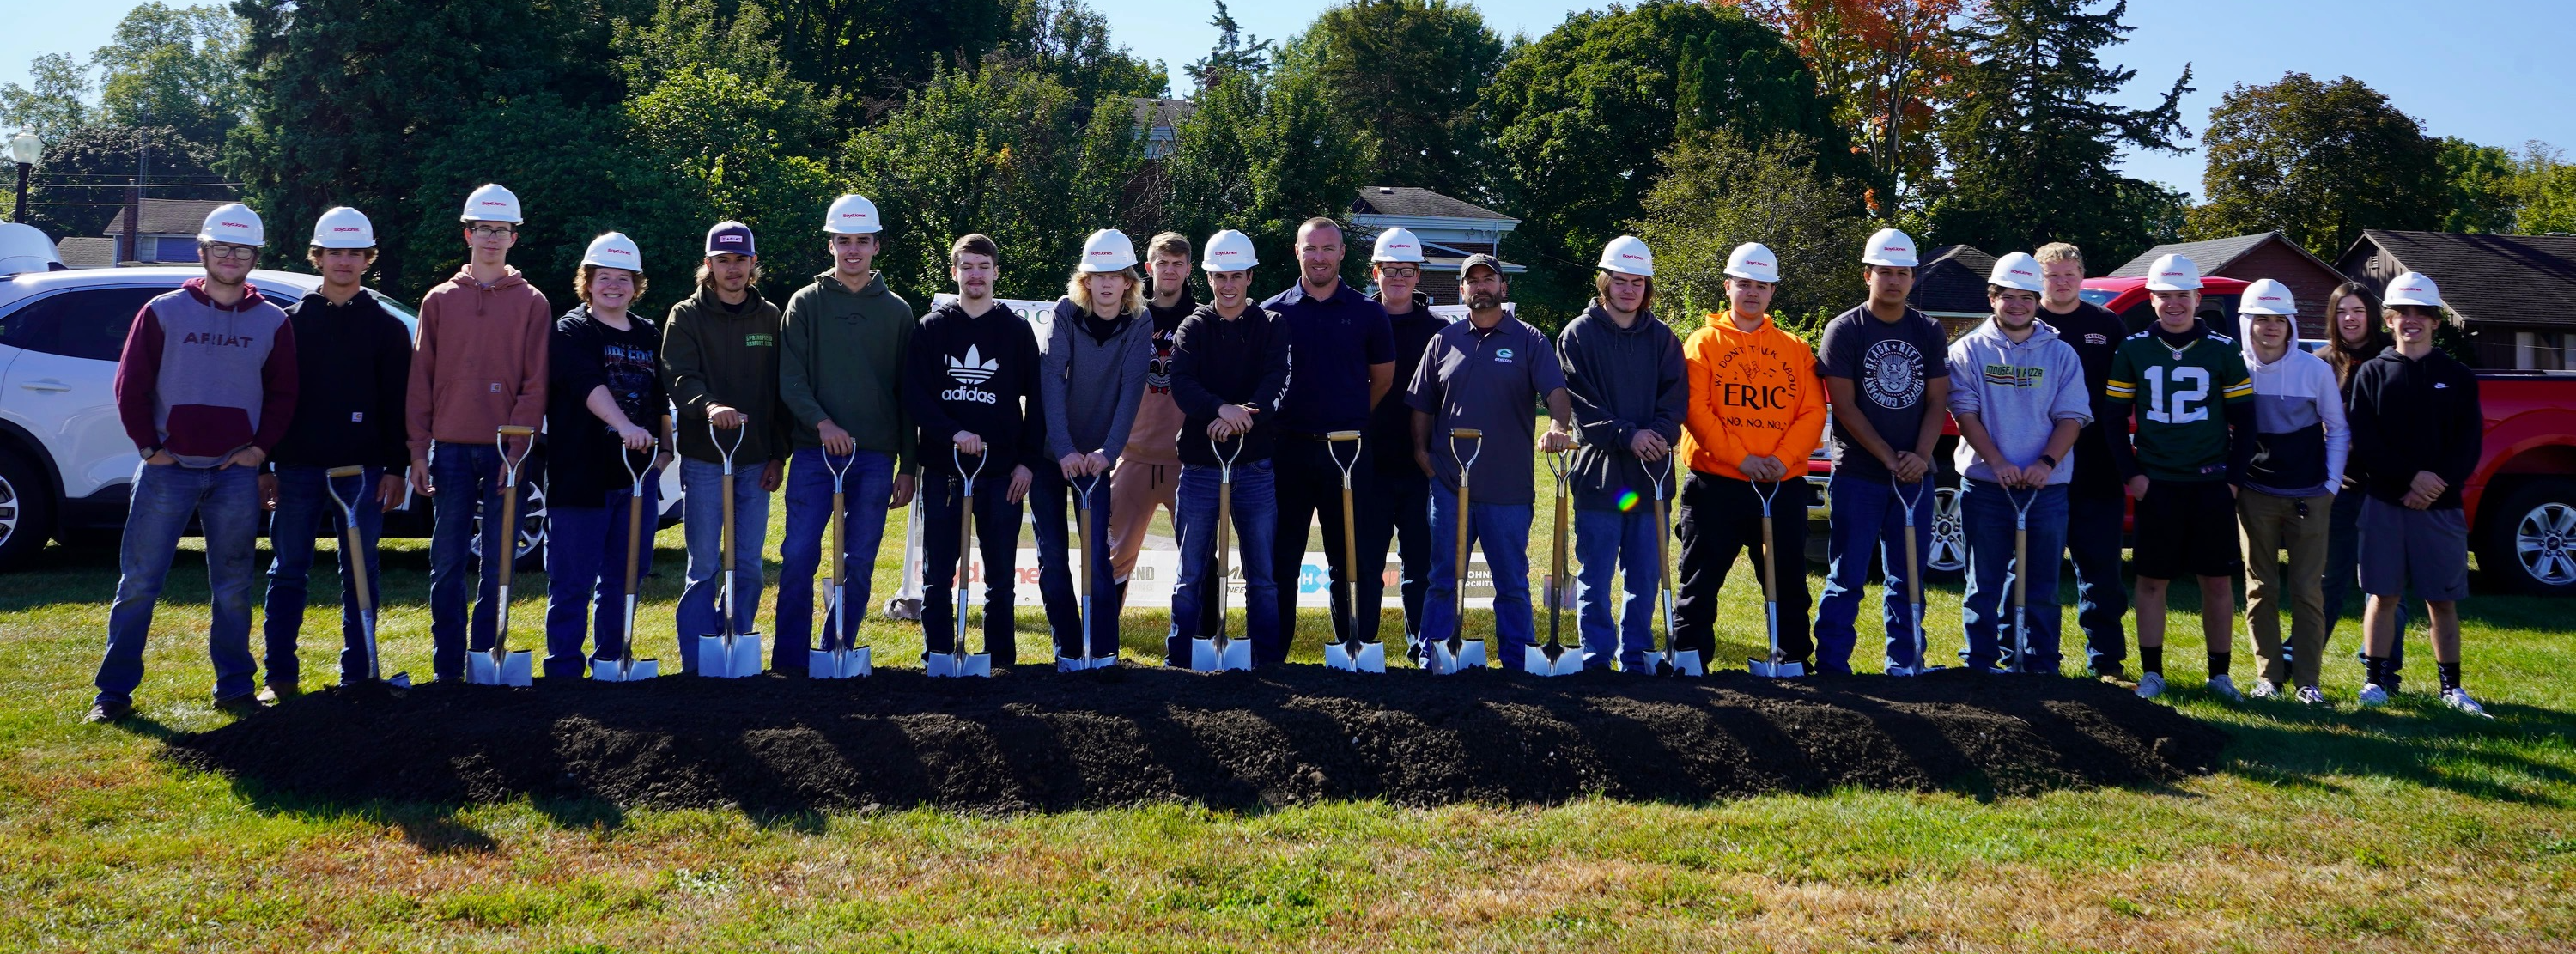 Groundbreaking ceremony held for Career and Technical Education Center at GHS